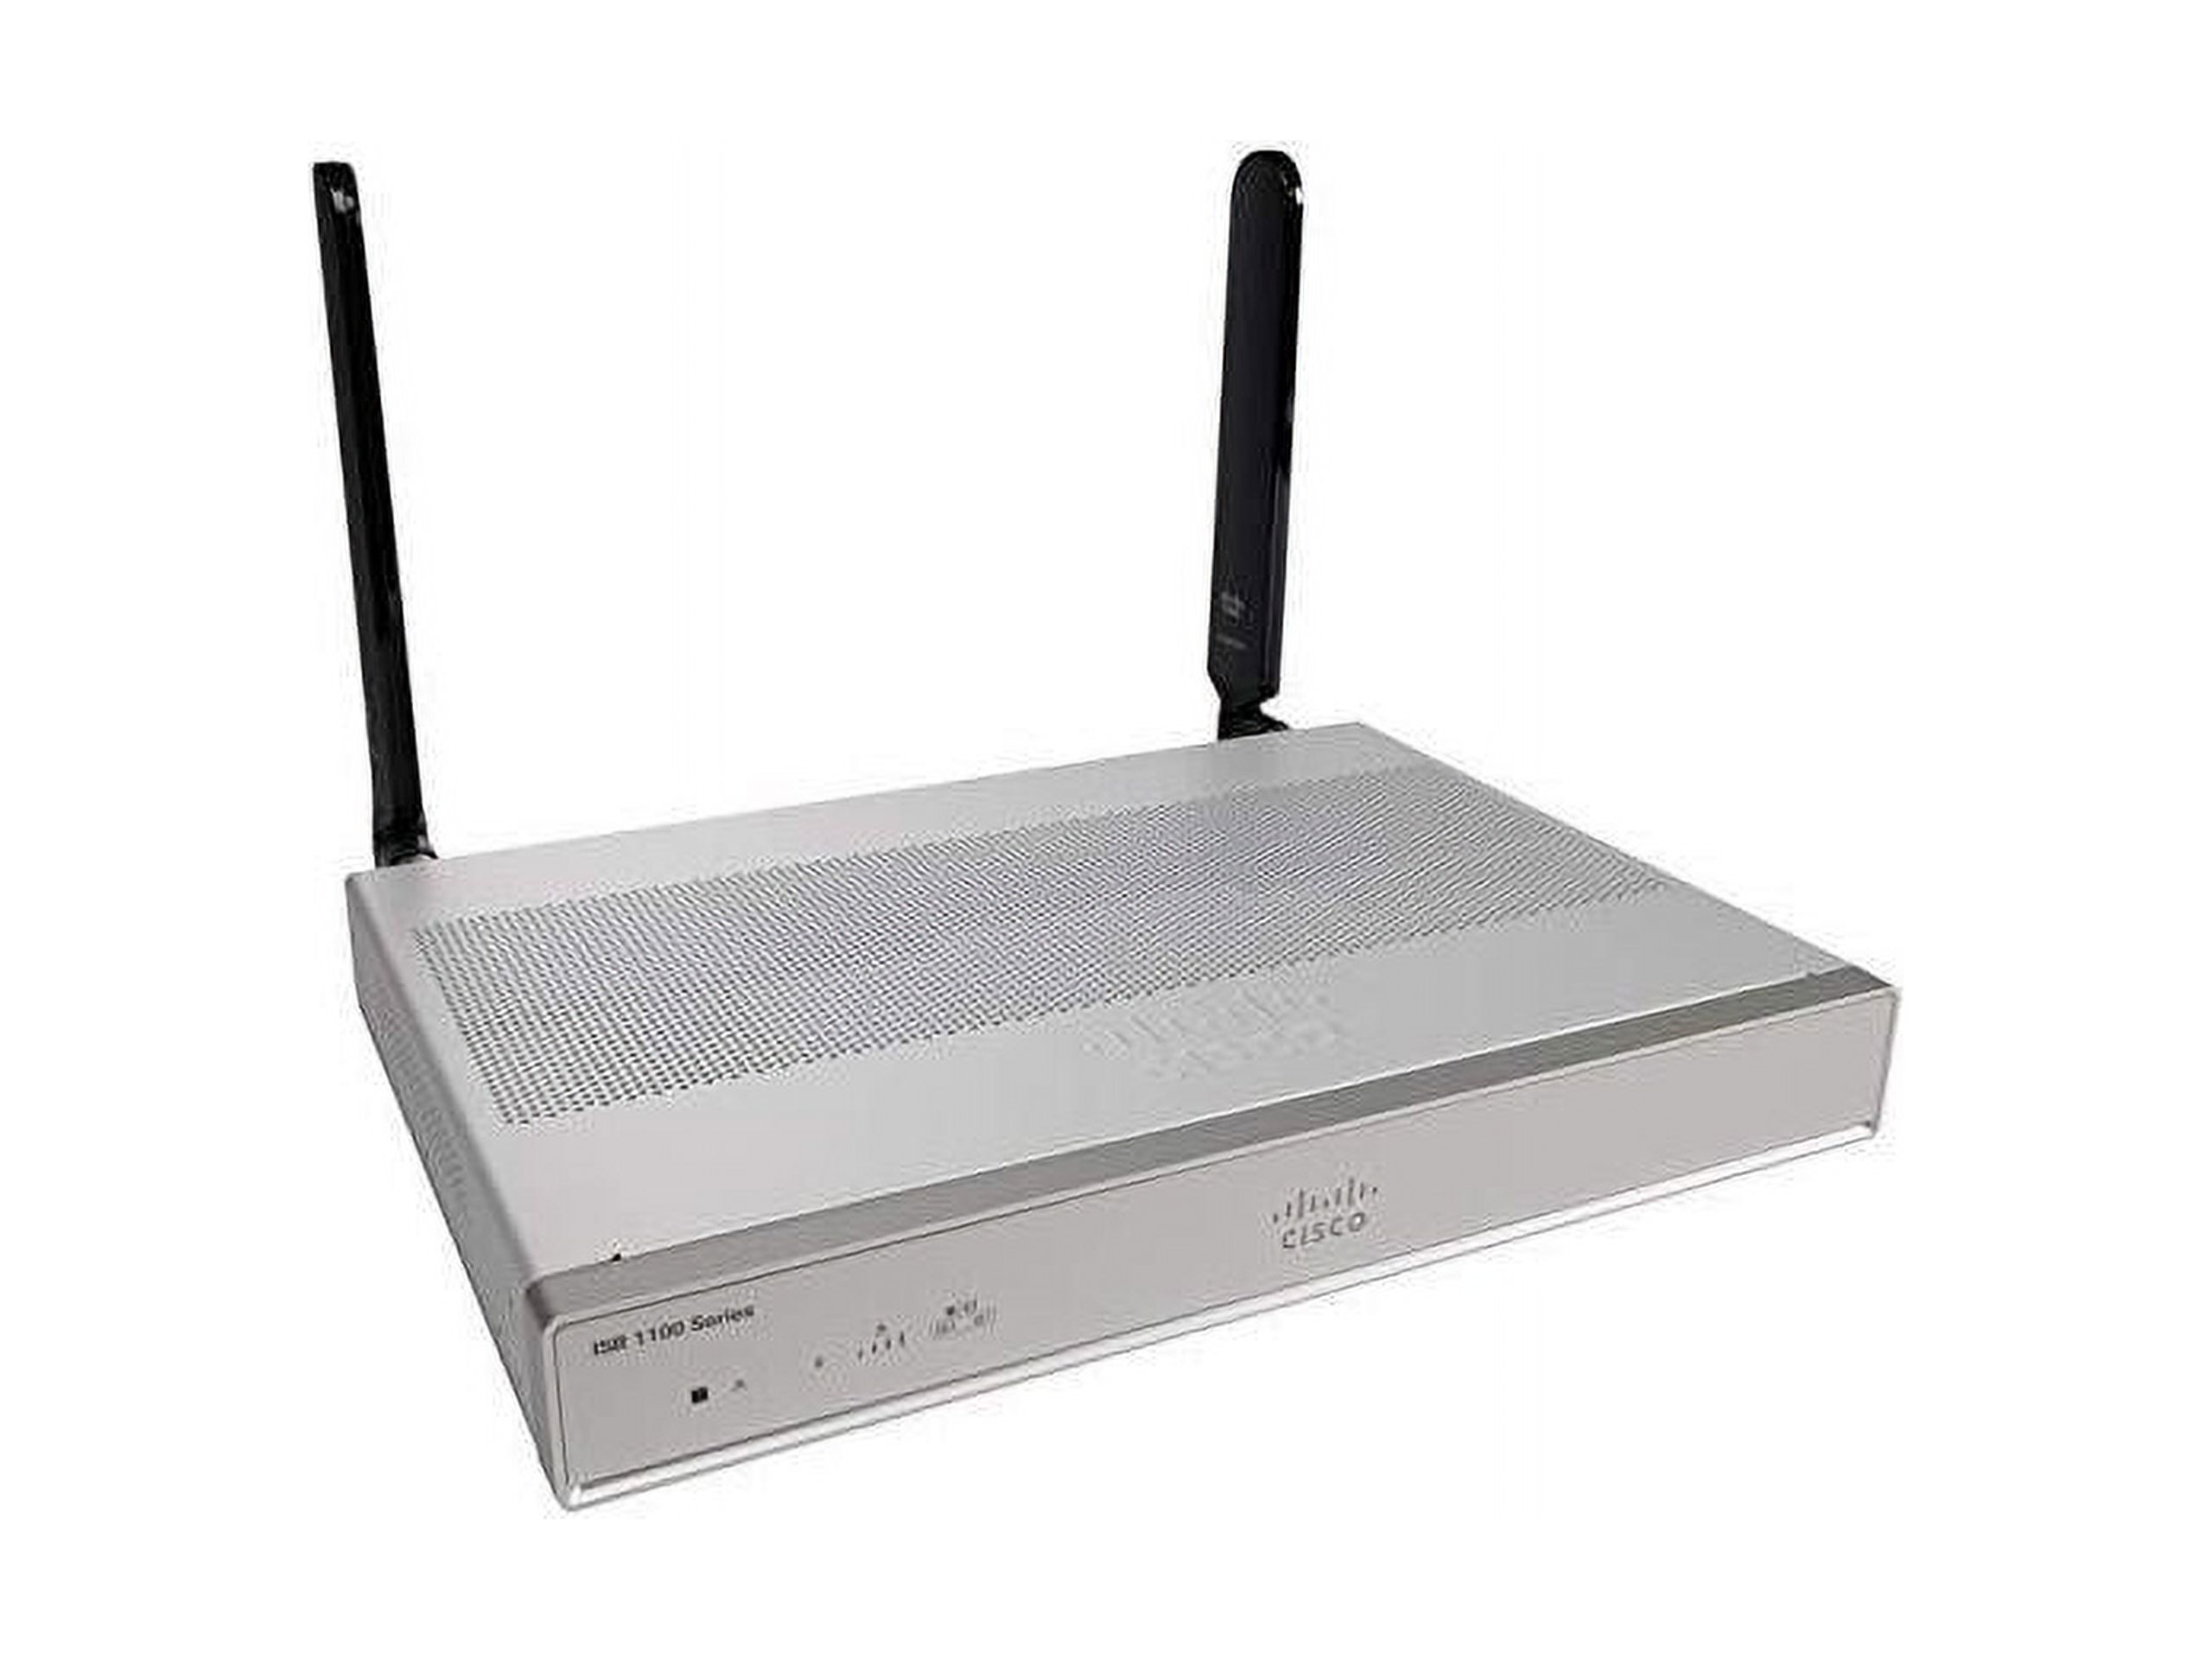 Cisco C1111-8PWB Wi-Fi 5 IEEE 802.11ac Ethernet Wireless Router - image 5 of 6